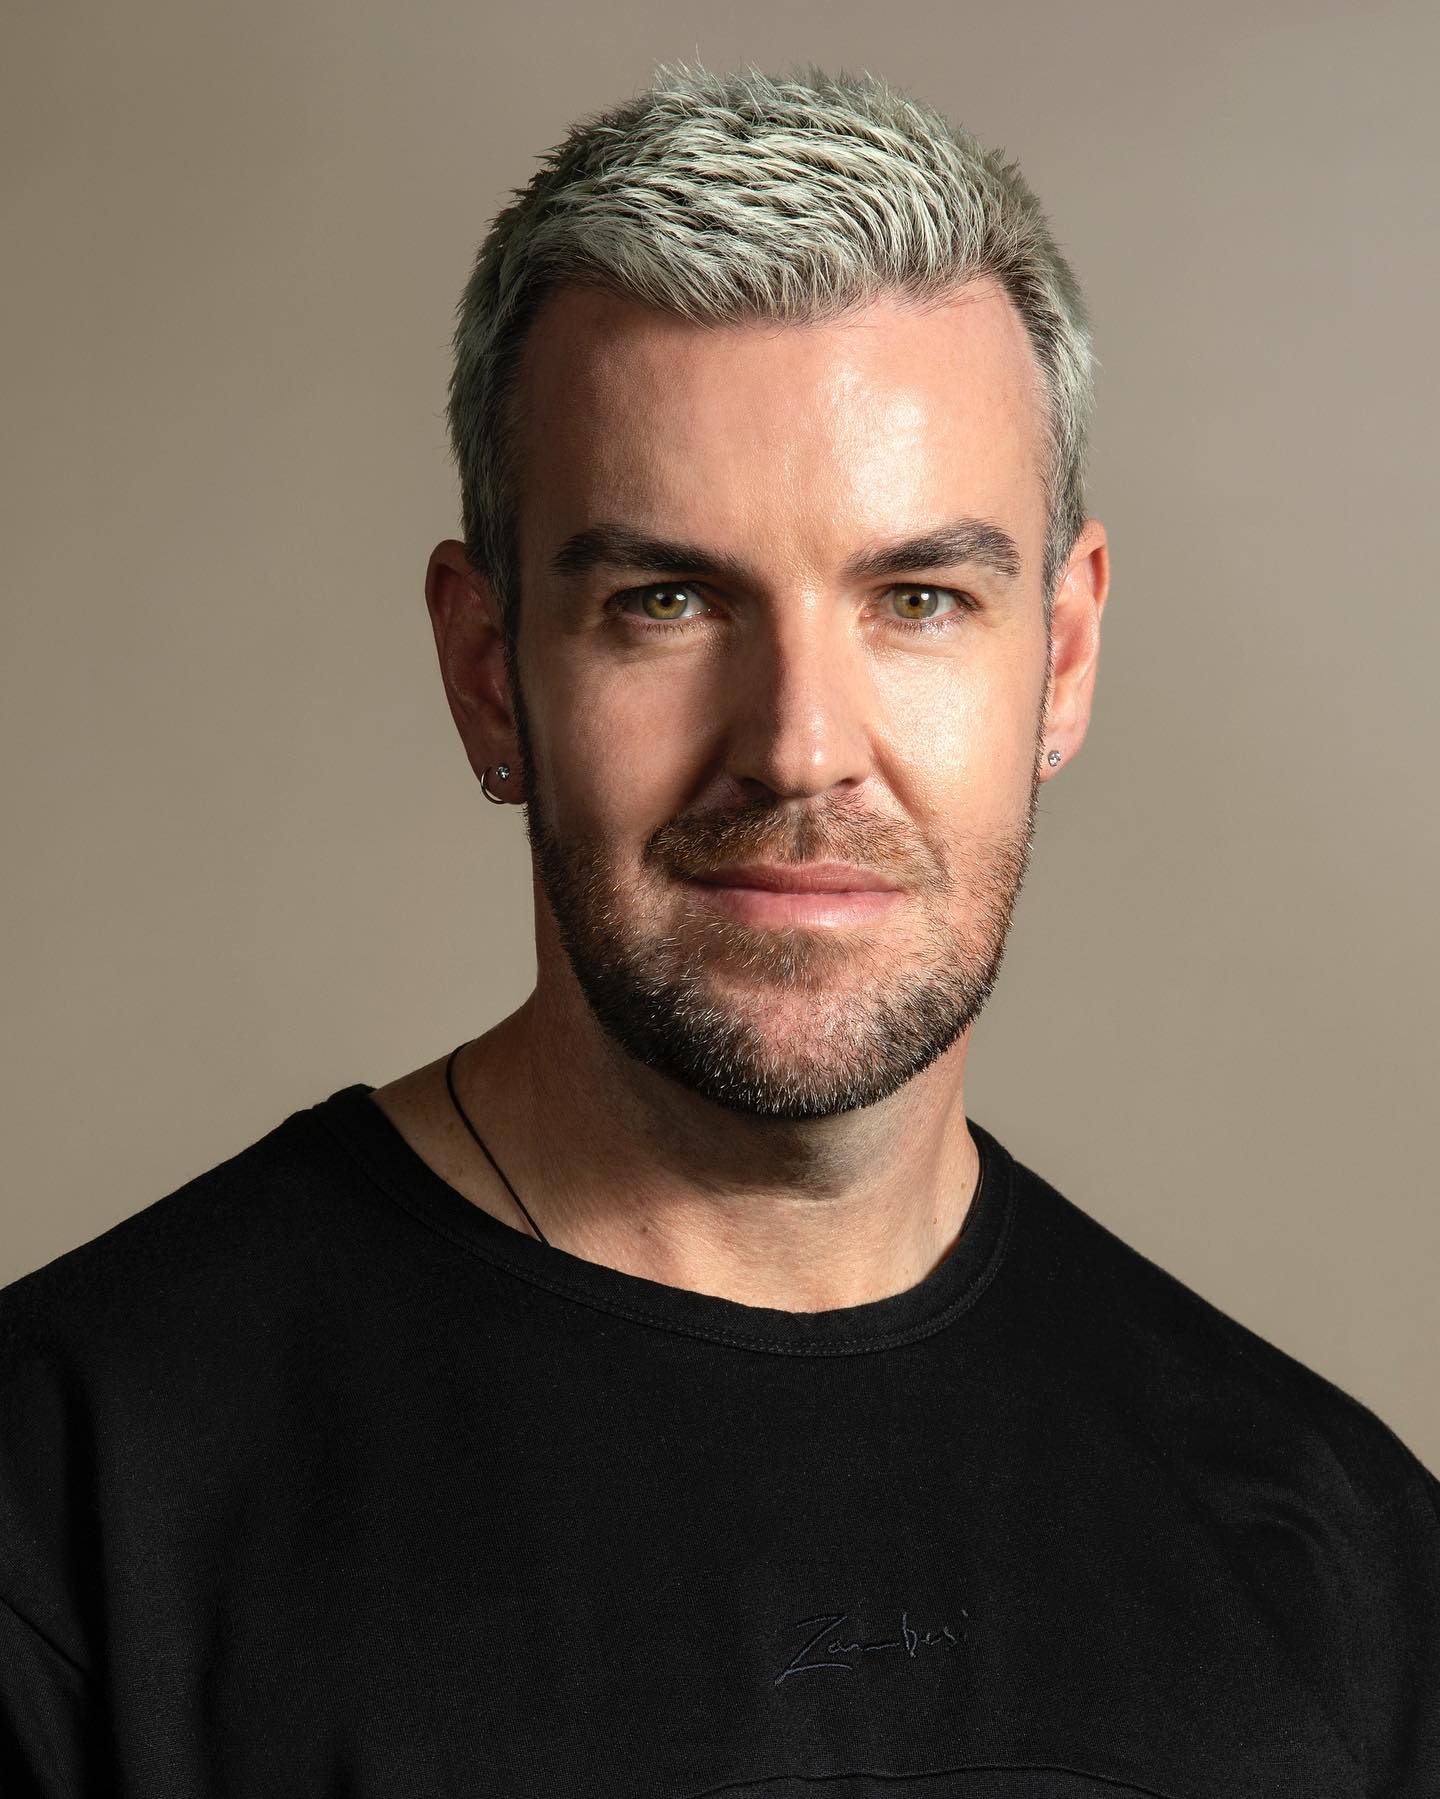 The hair trends set to be big over the next year, according to award-winning hairdresser Michael Beel